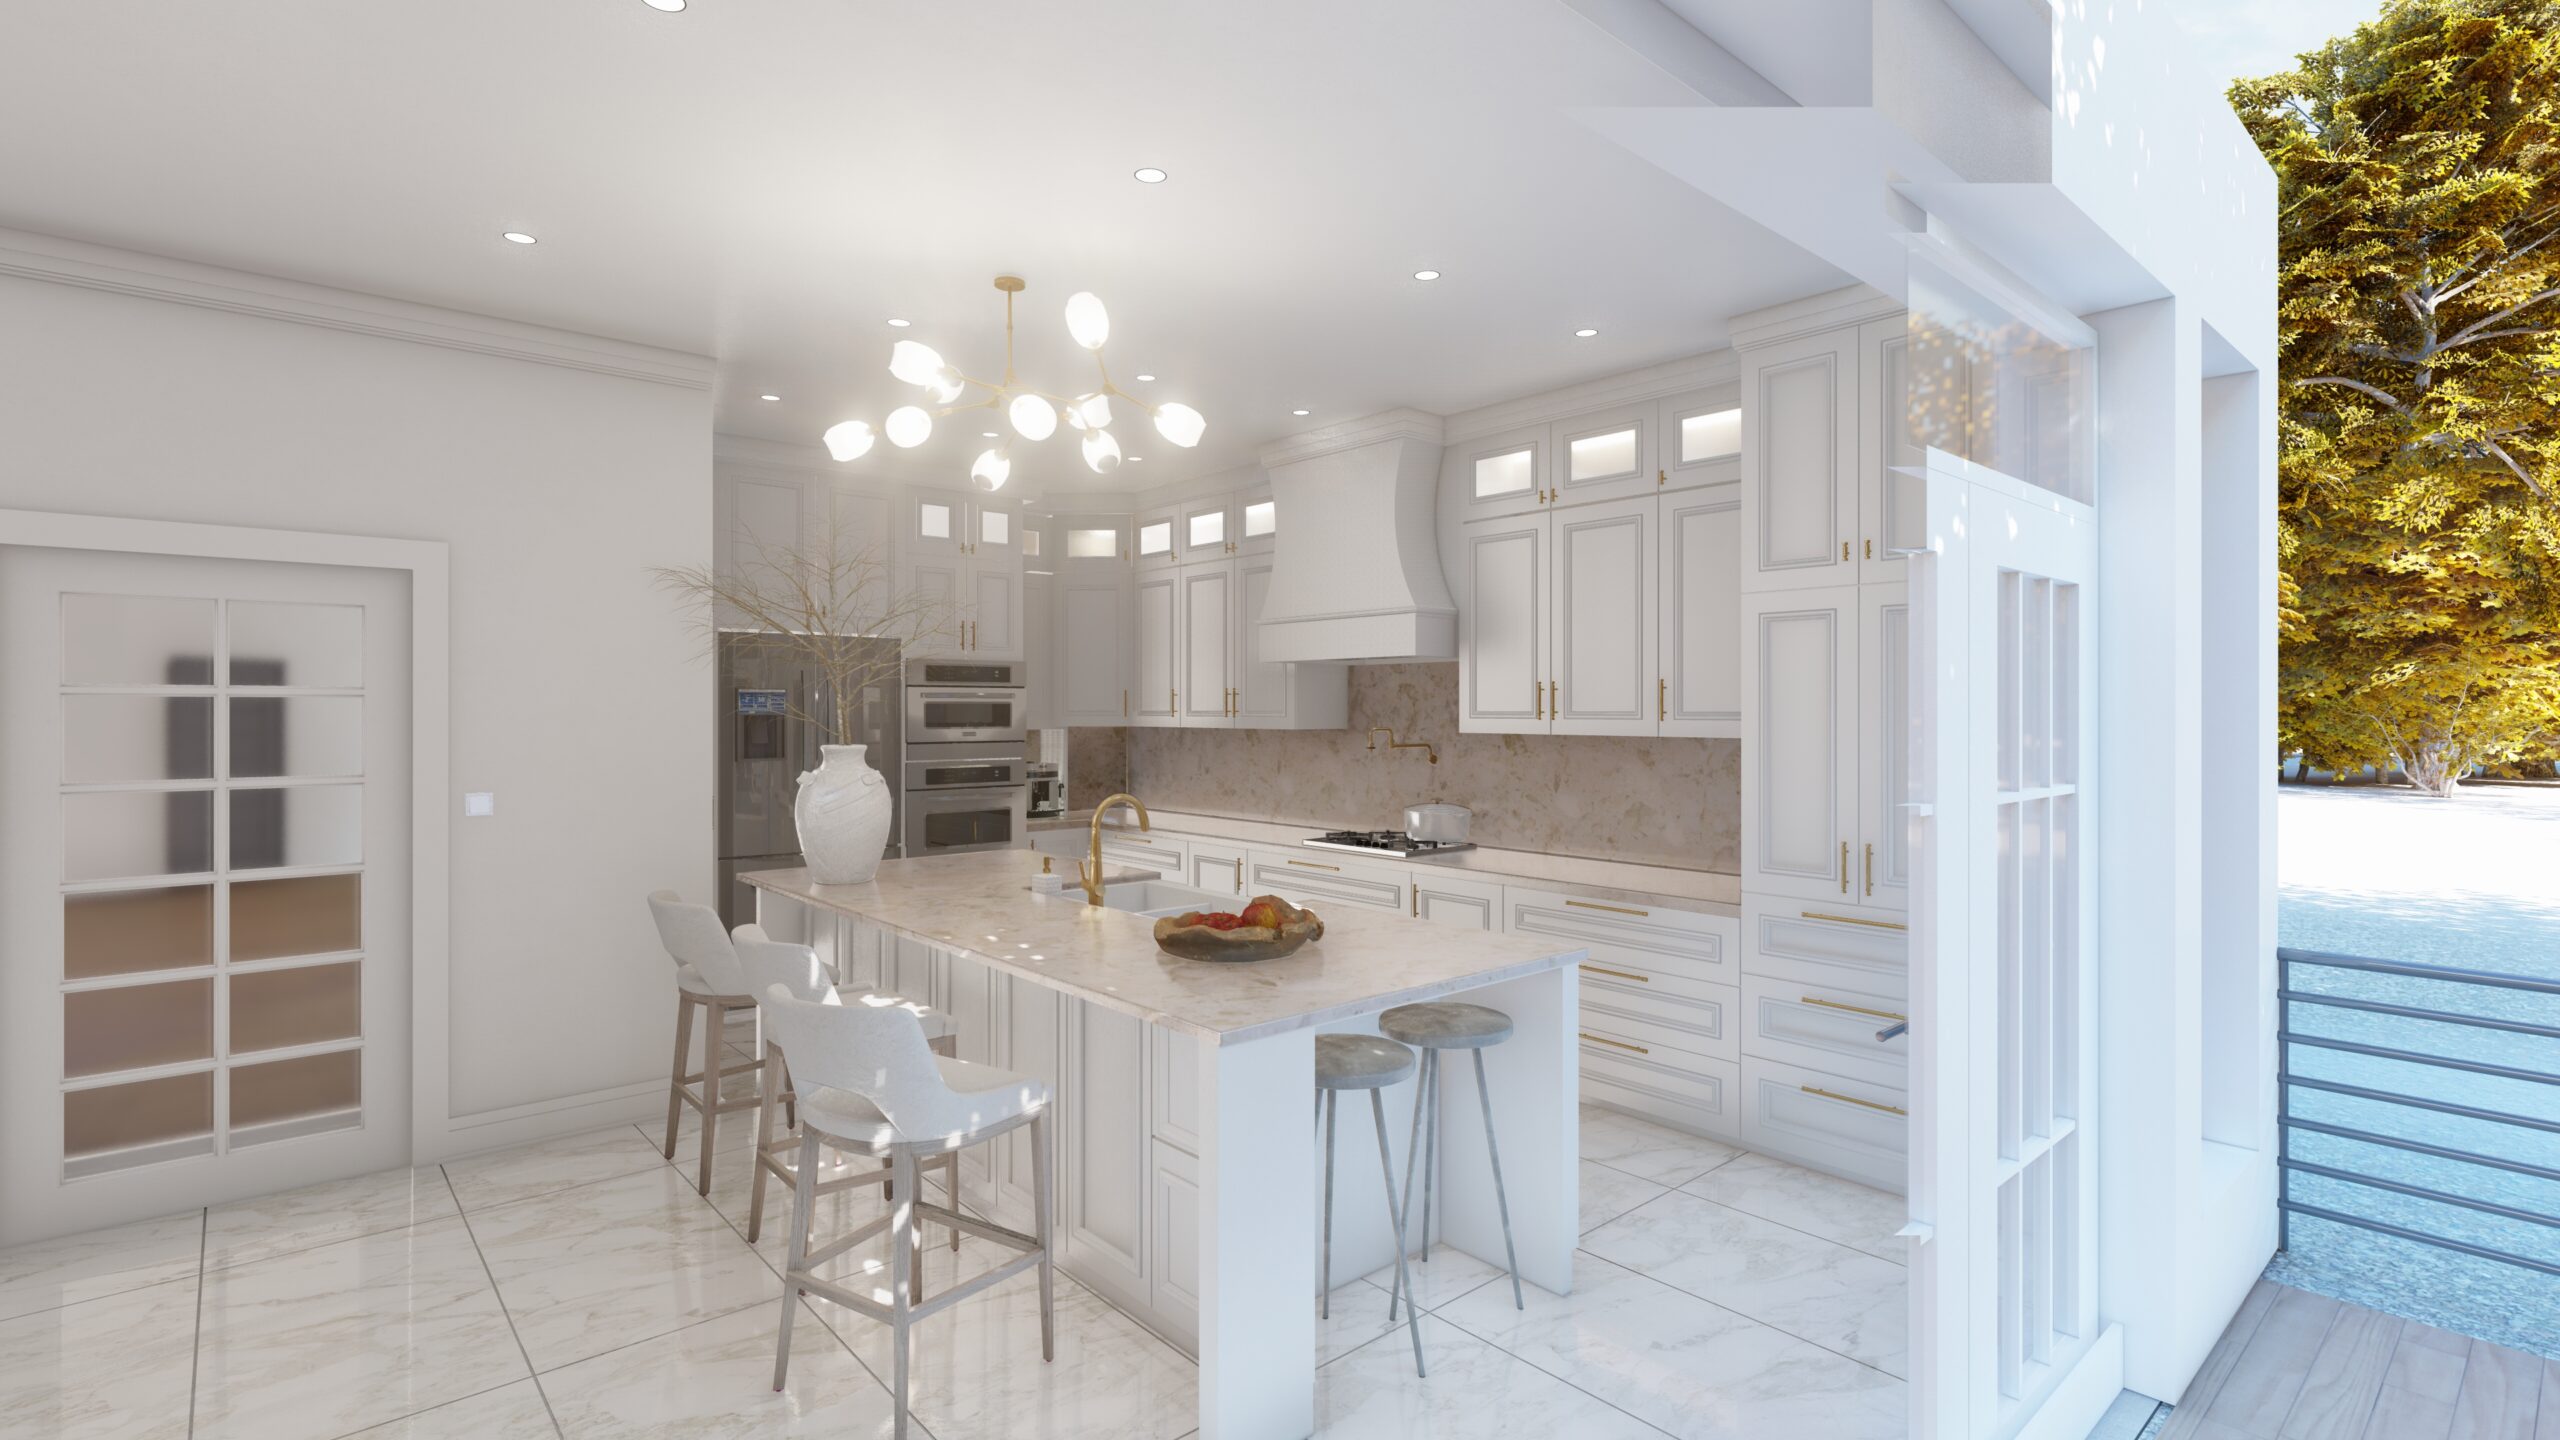 3D Rendering Services in Canada